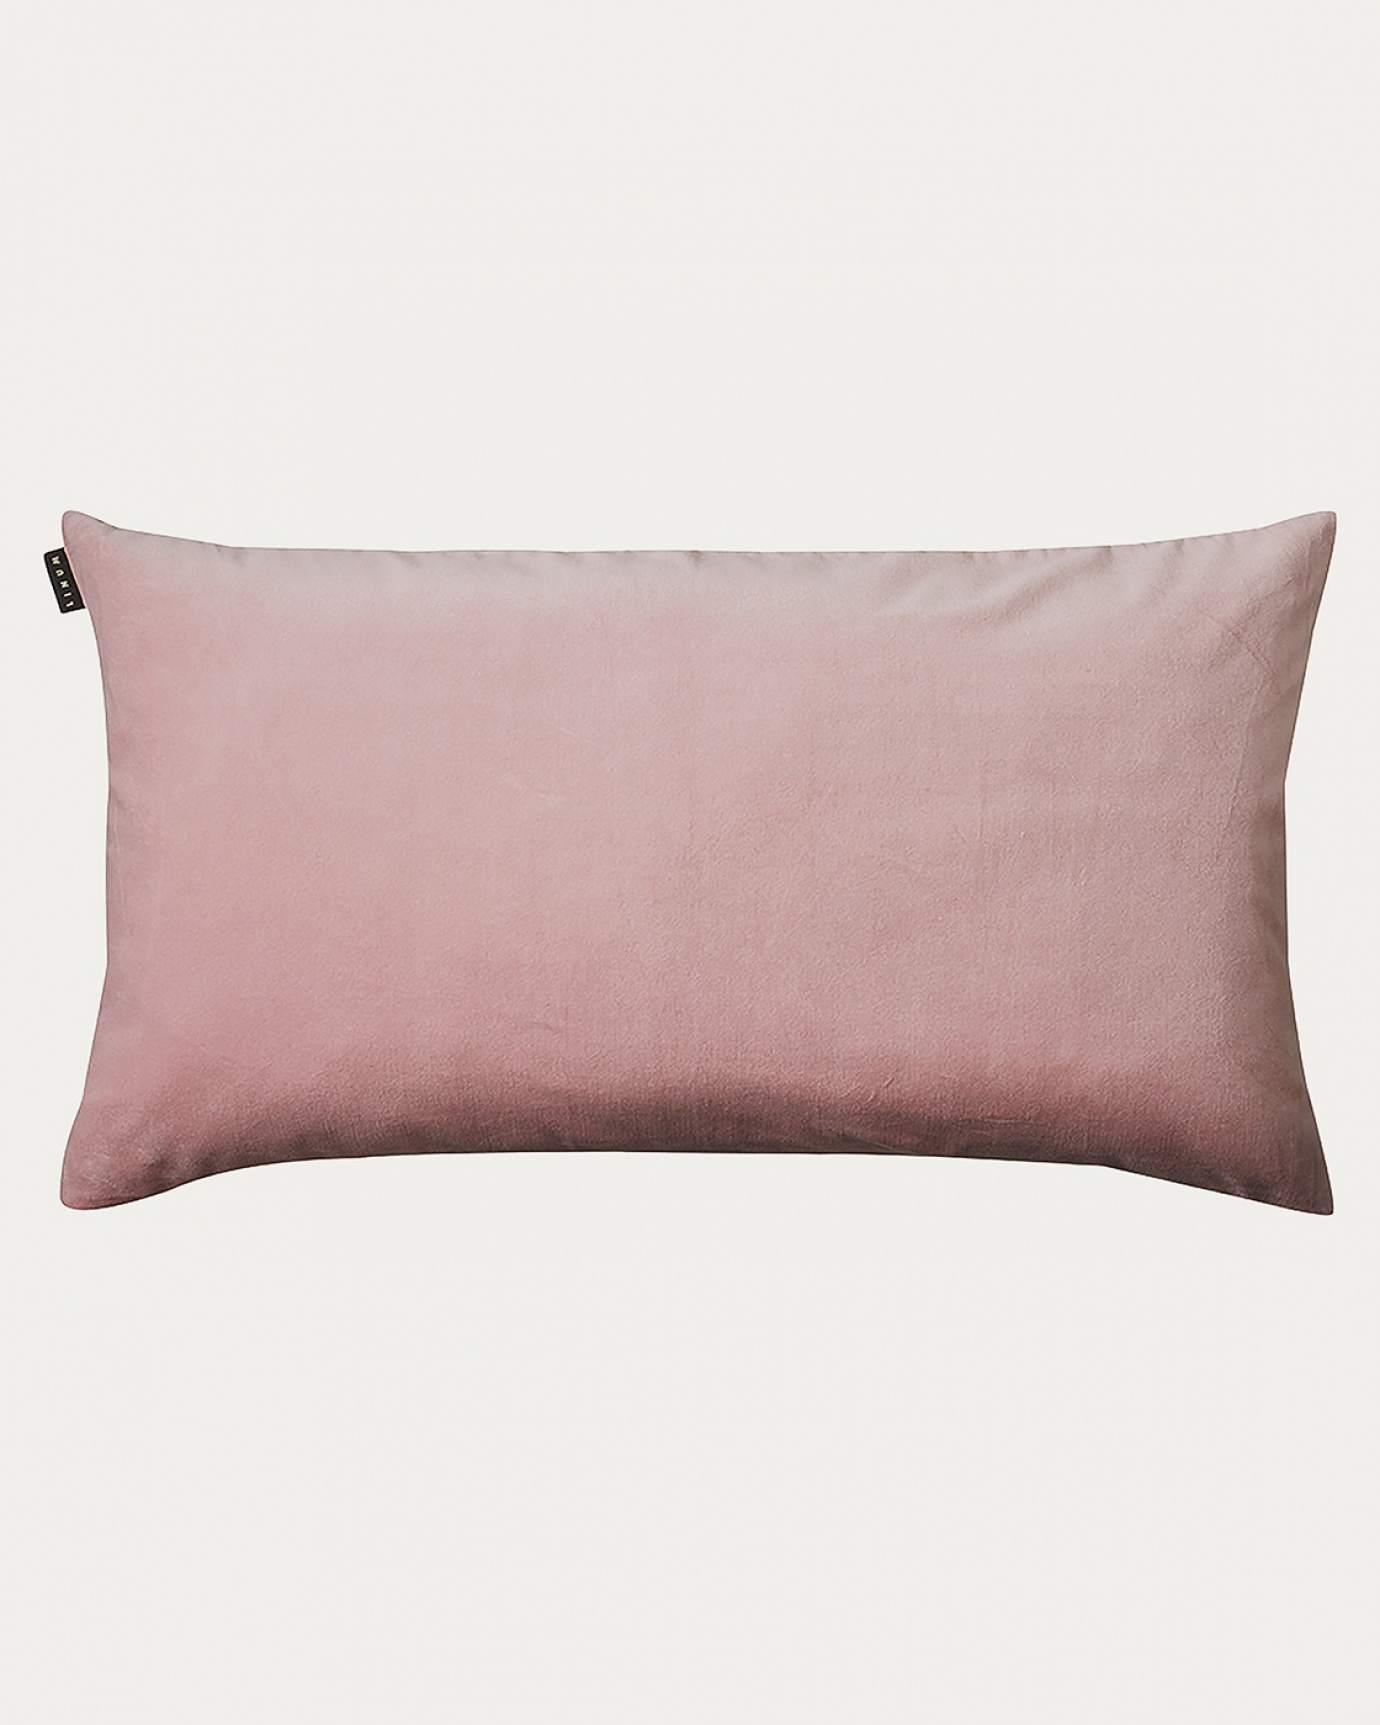 Product image dusty pink PAOLO cushion cover made of soft cotton velvet and 100% linen from LINUM DESIGN. Size 50x90 cm.